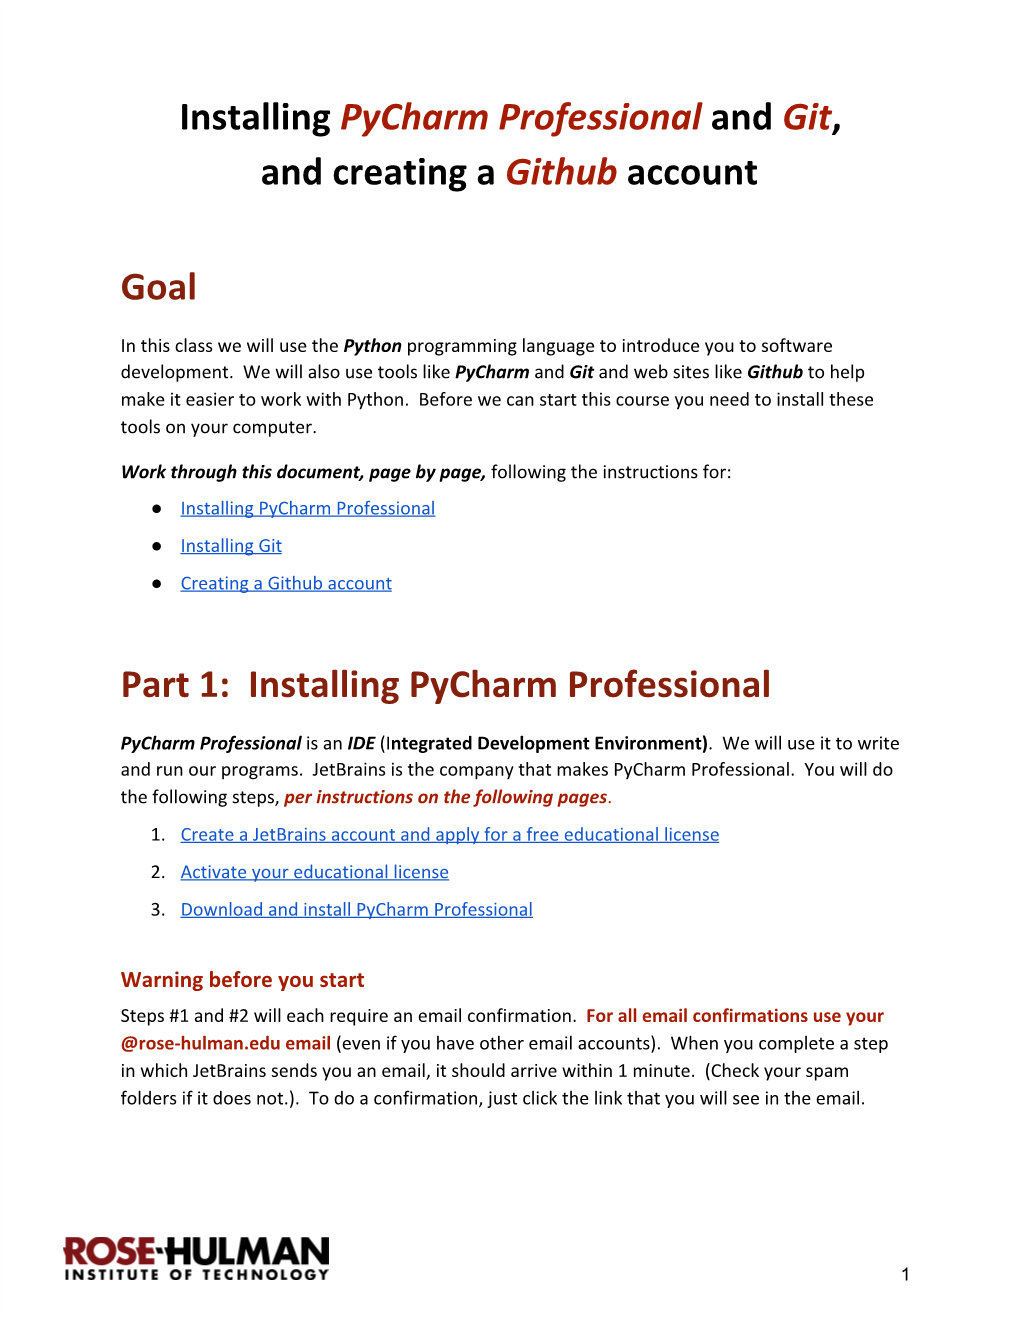 Installing Pycharm Professional and Git, ​ ​ ​ ​ ​ and Creating a Github Account ​ ​